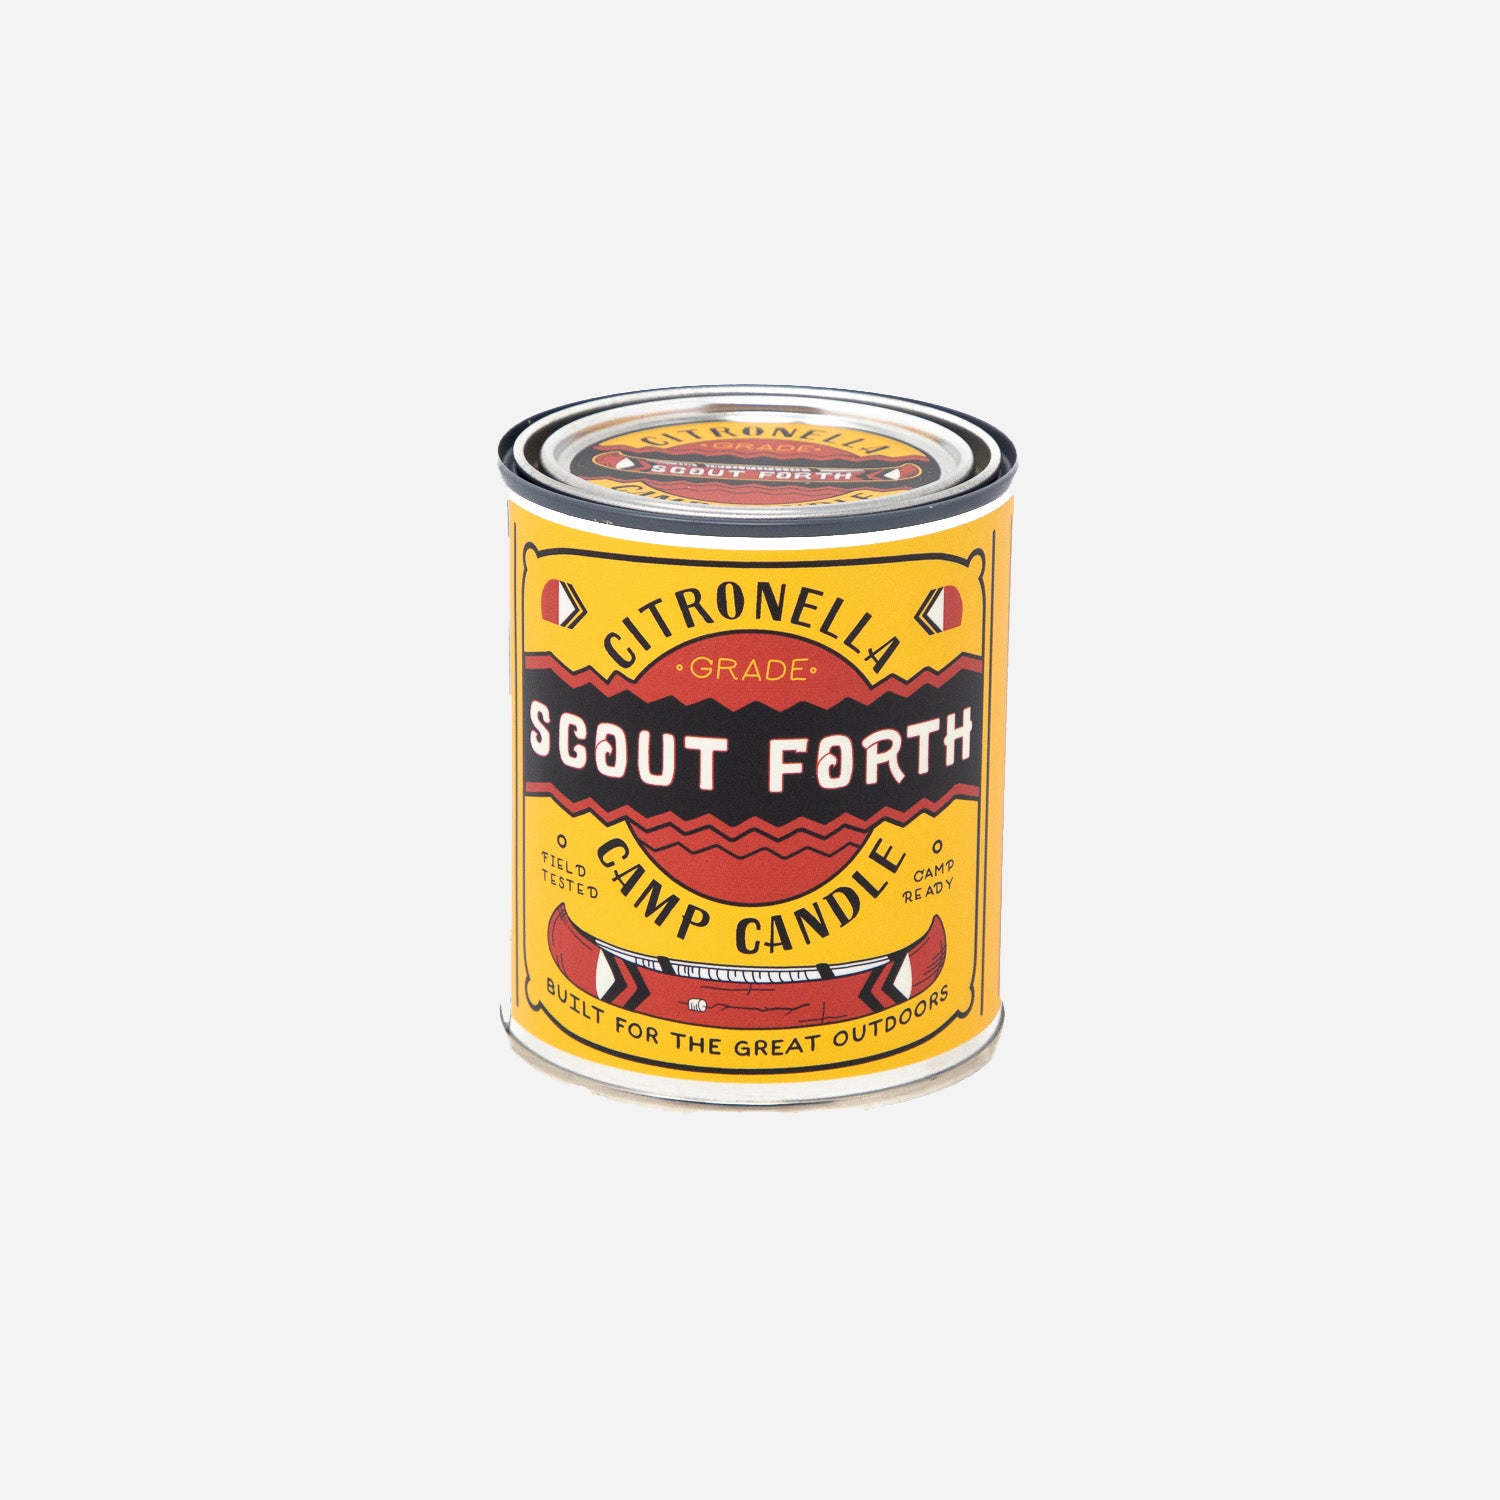 8 OZ NATIONAL PARK CANDLE - SCOUT FORTH